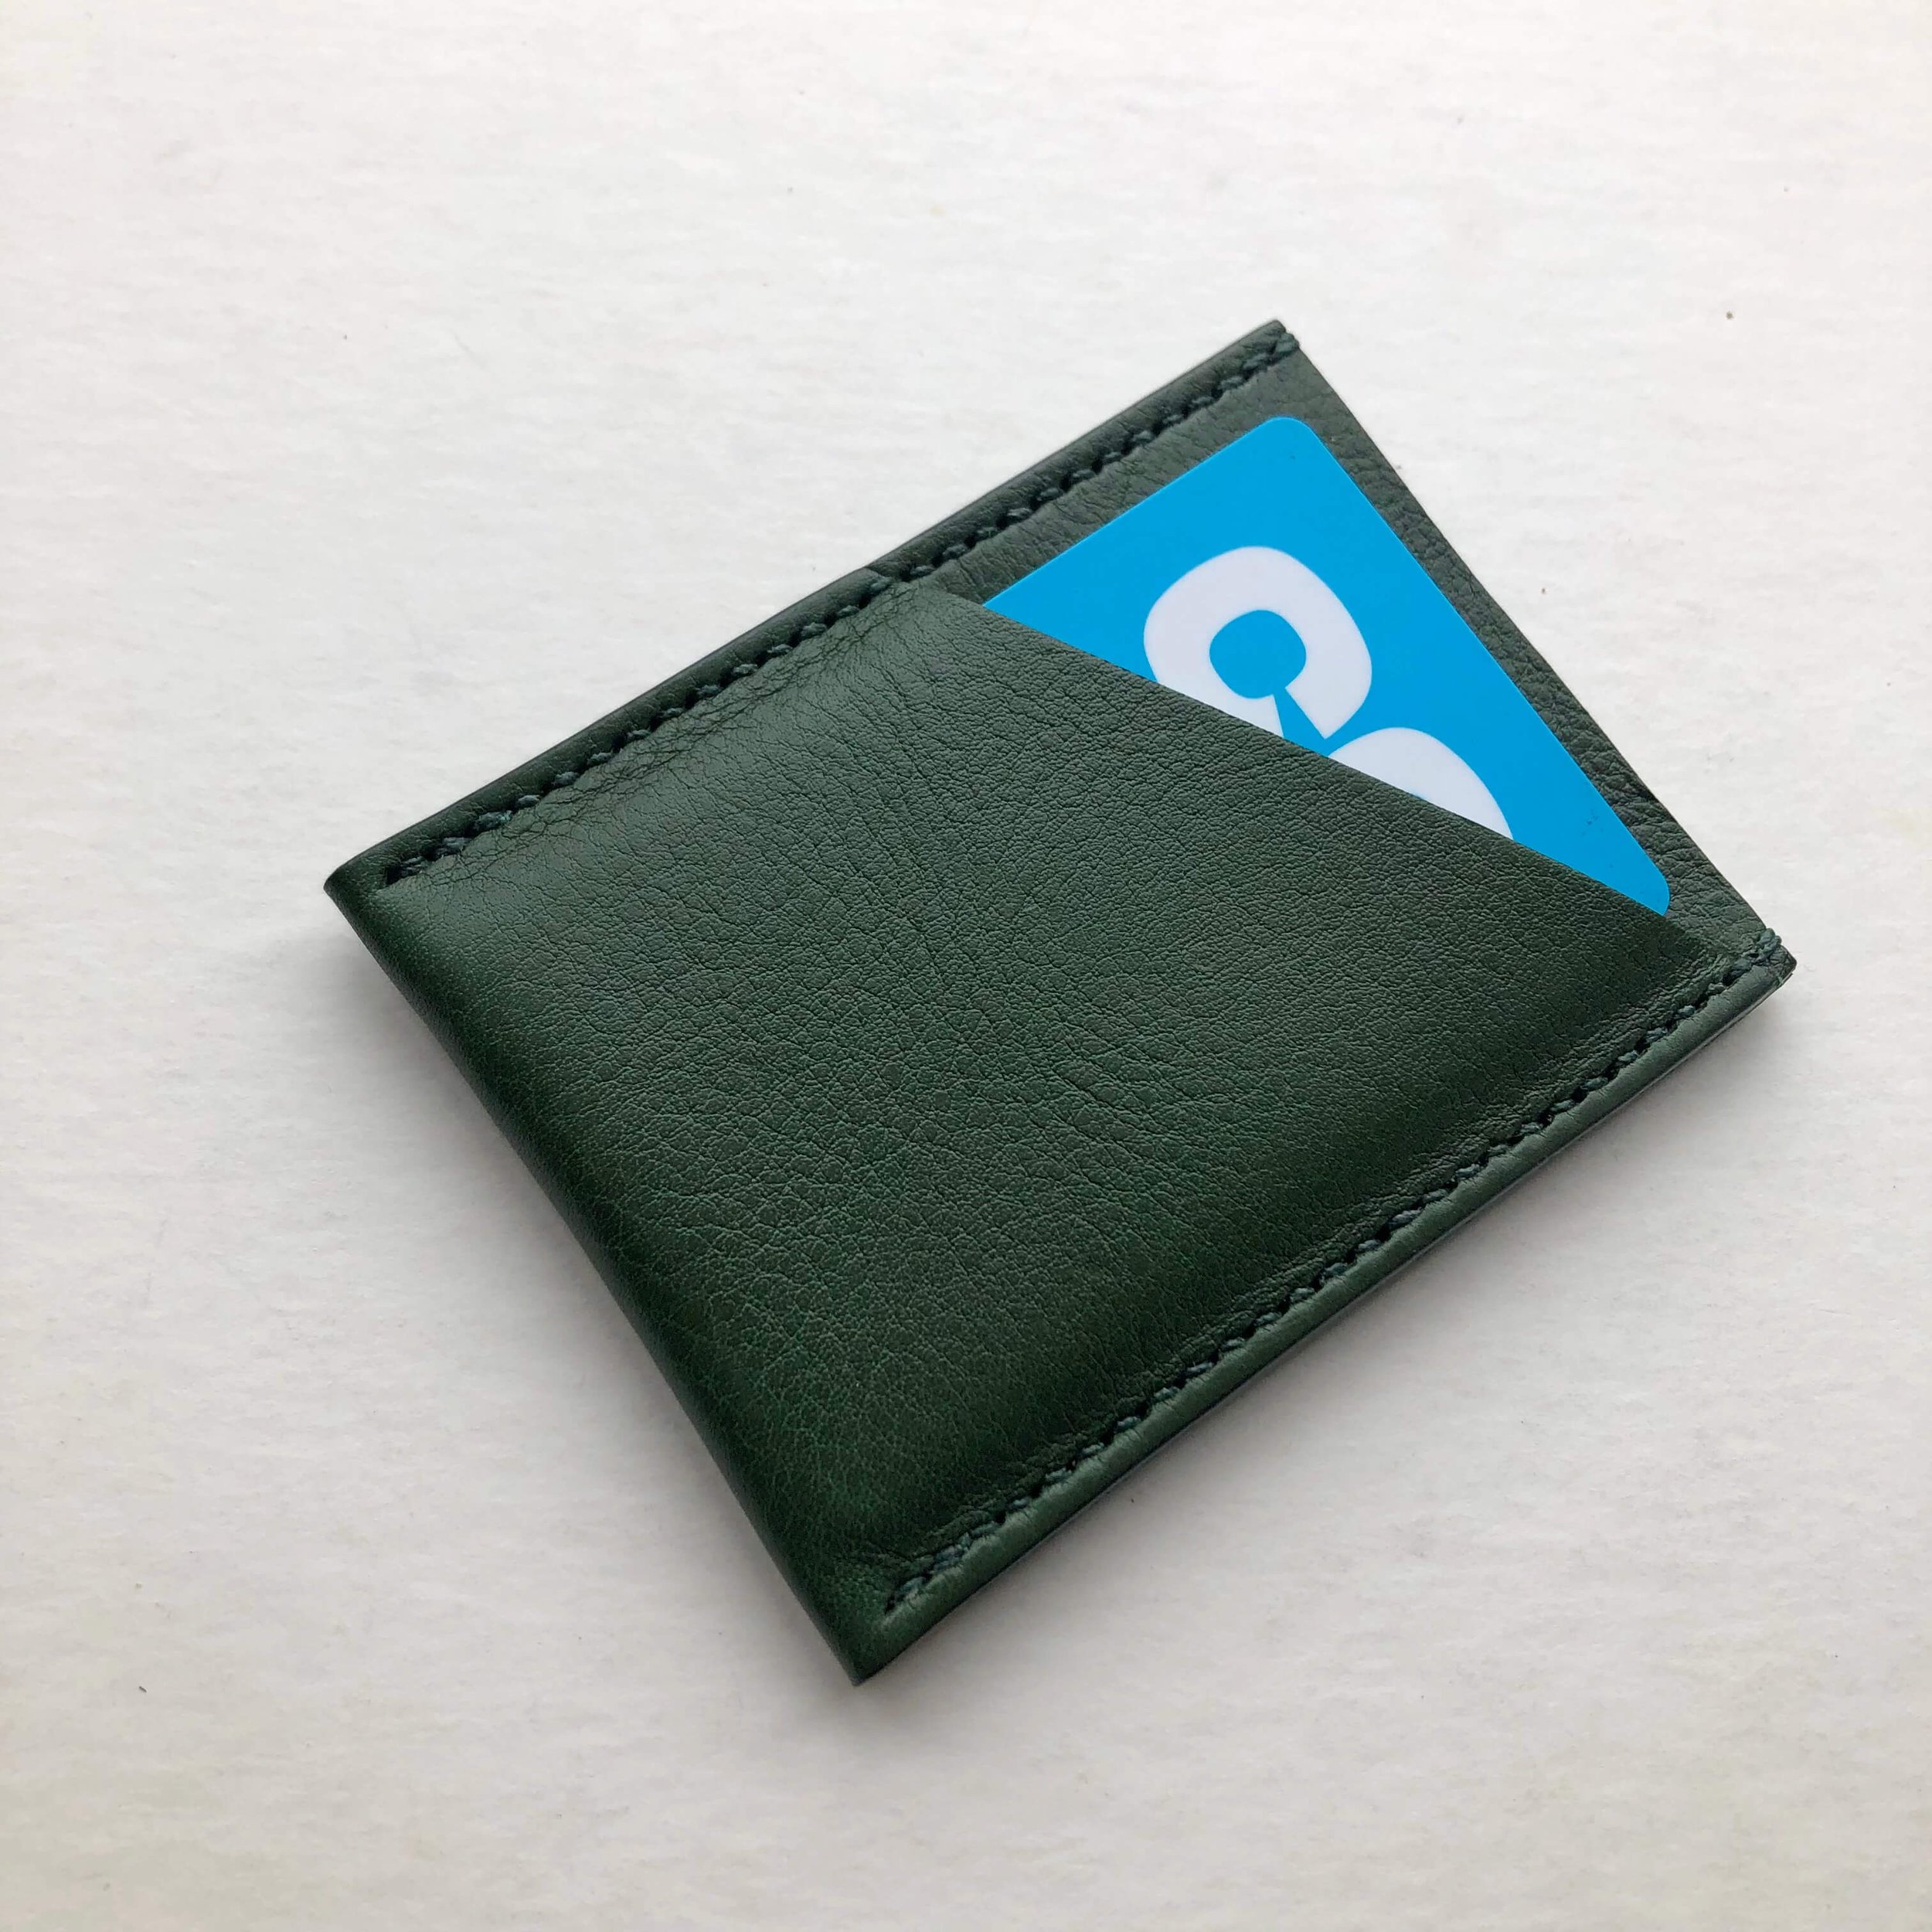 CARV sustainable leather wallet in green handmade in the UK